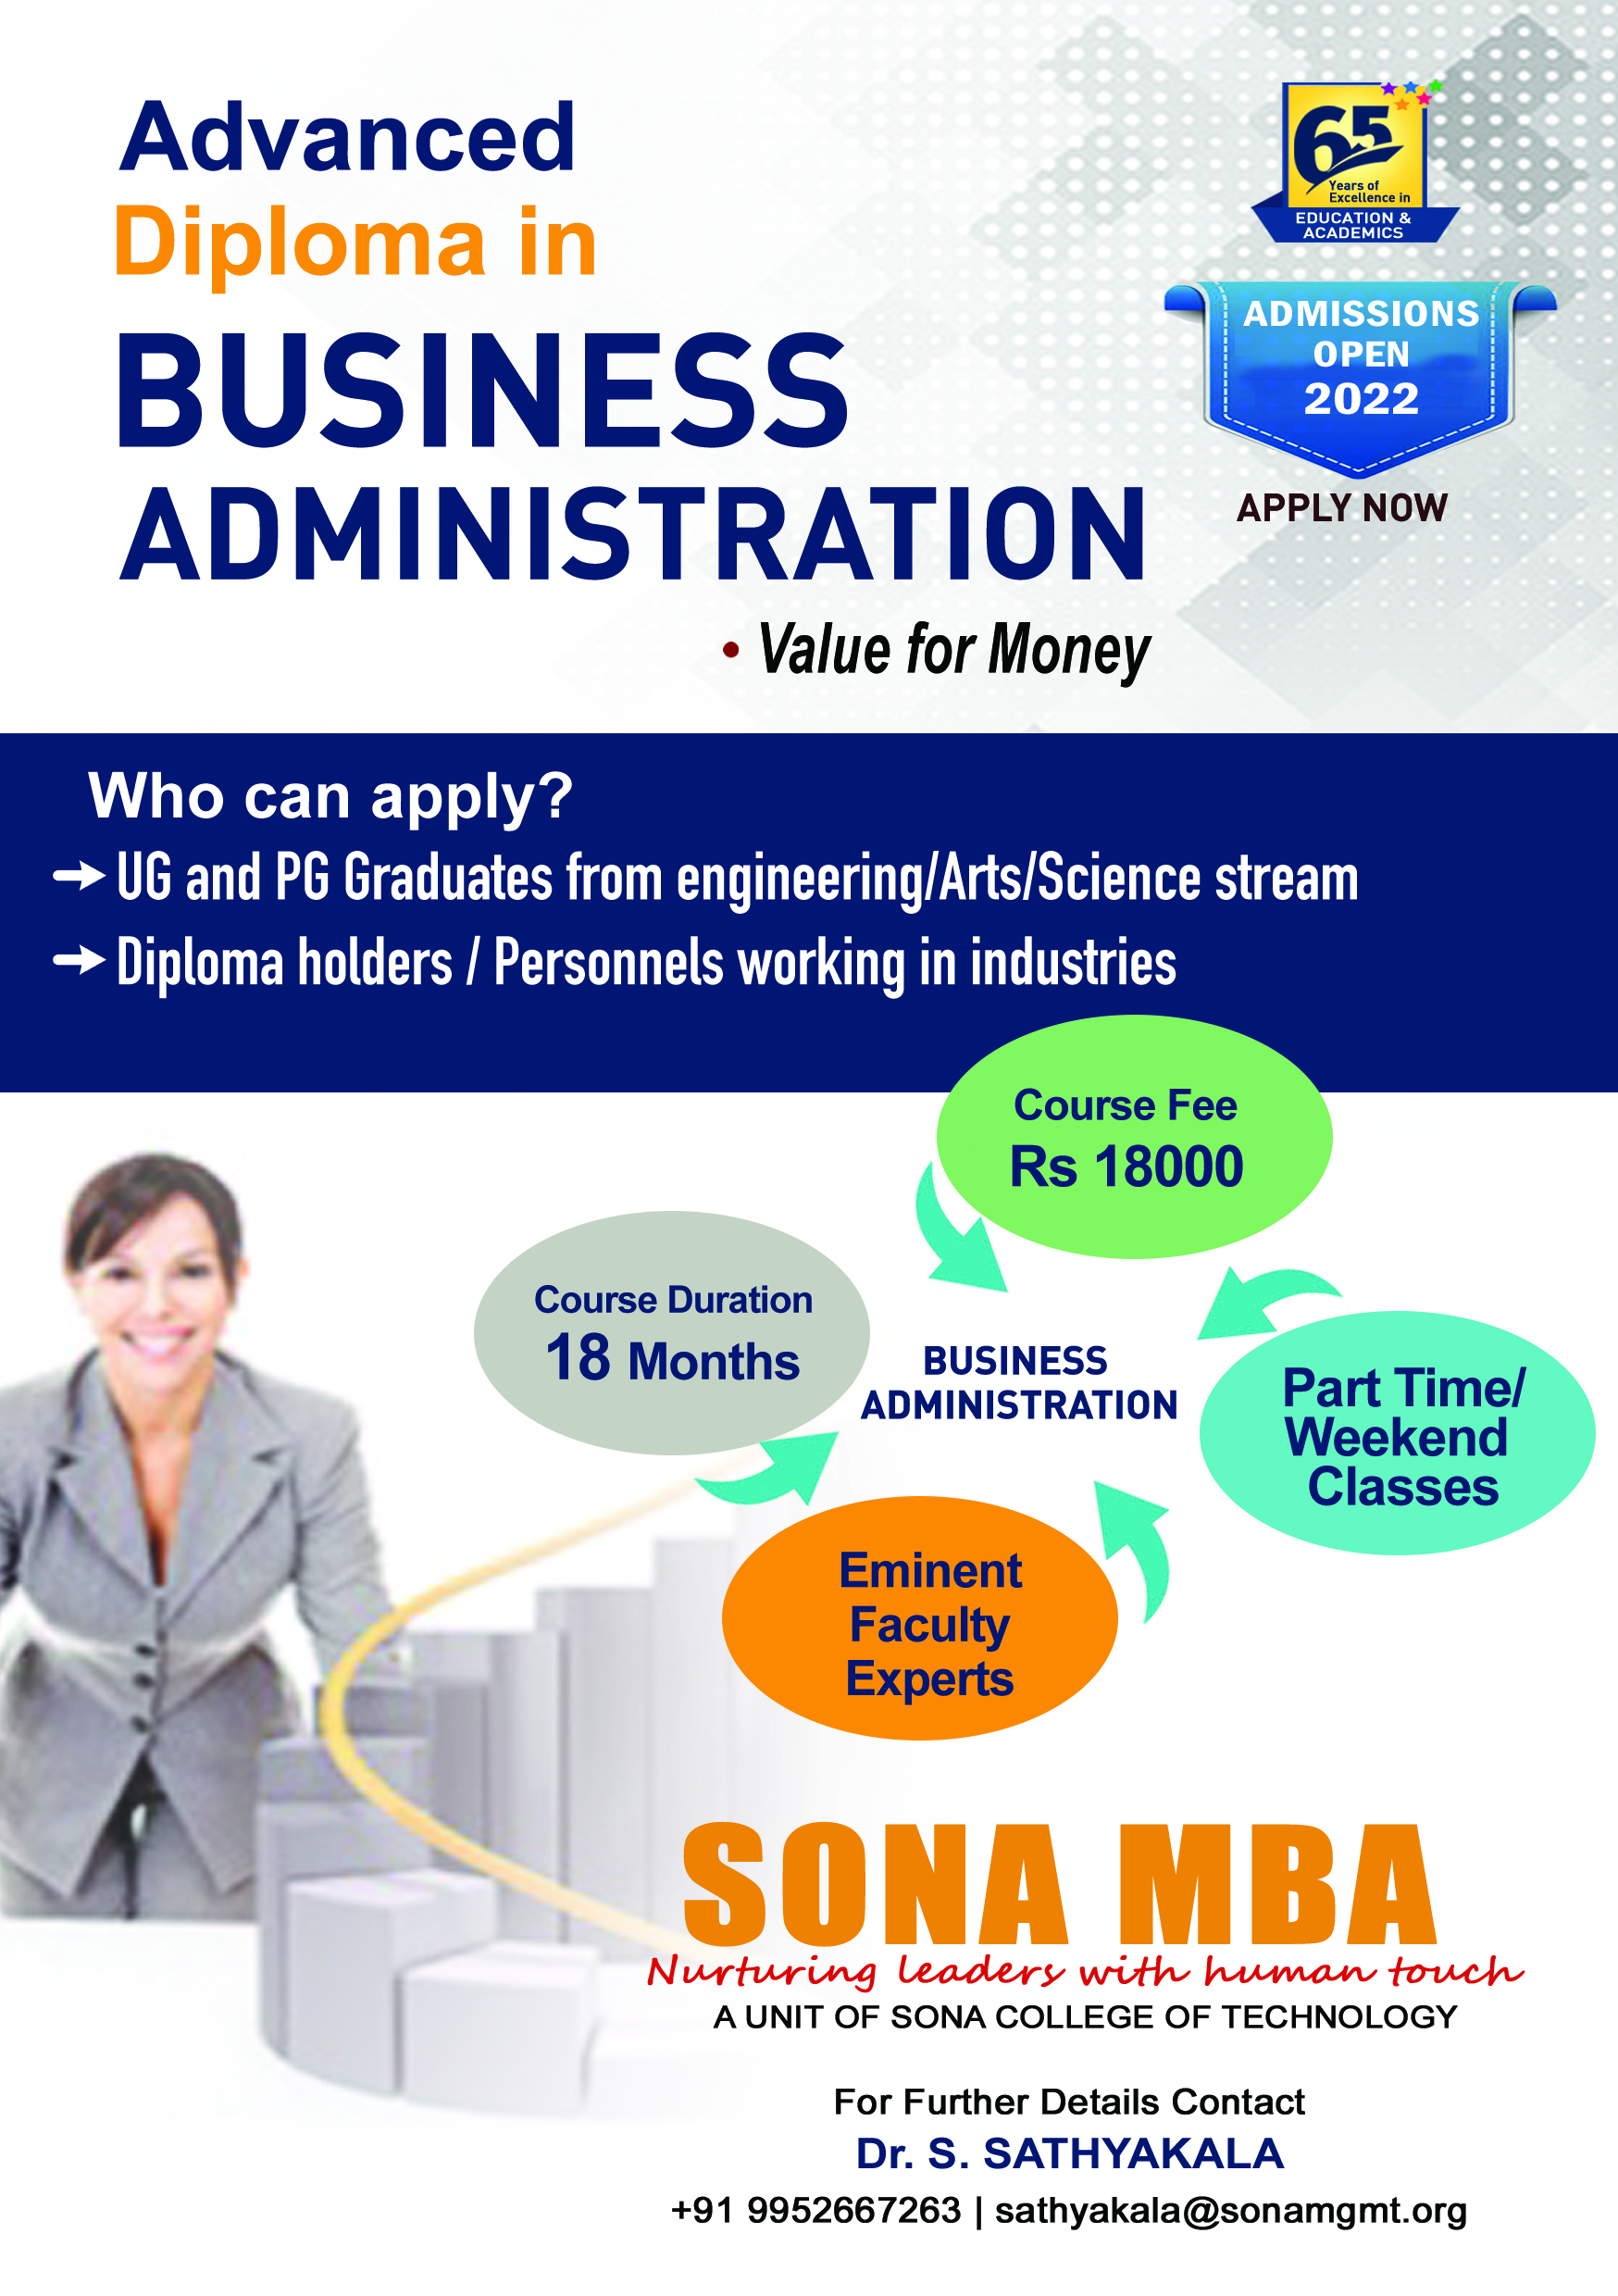 Advanced Diploma in Business Administration